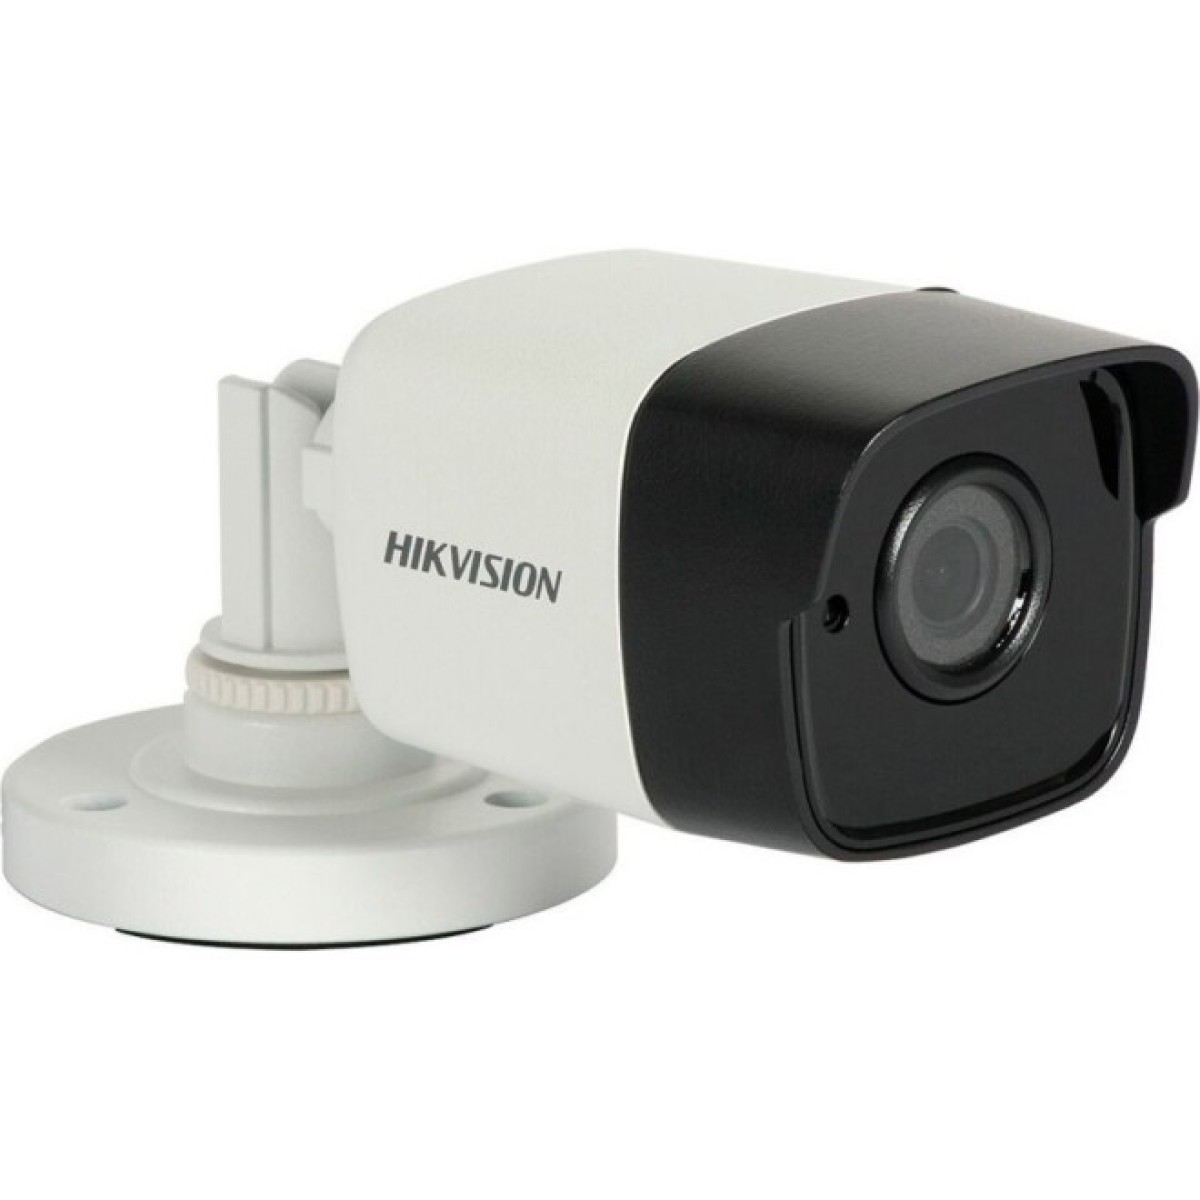 Камера Hikvision DS-2CE16D8T-ITF (2.8) 98_98.jpg - фото 1